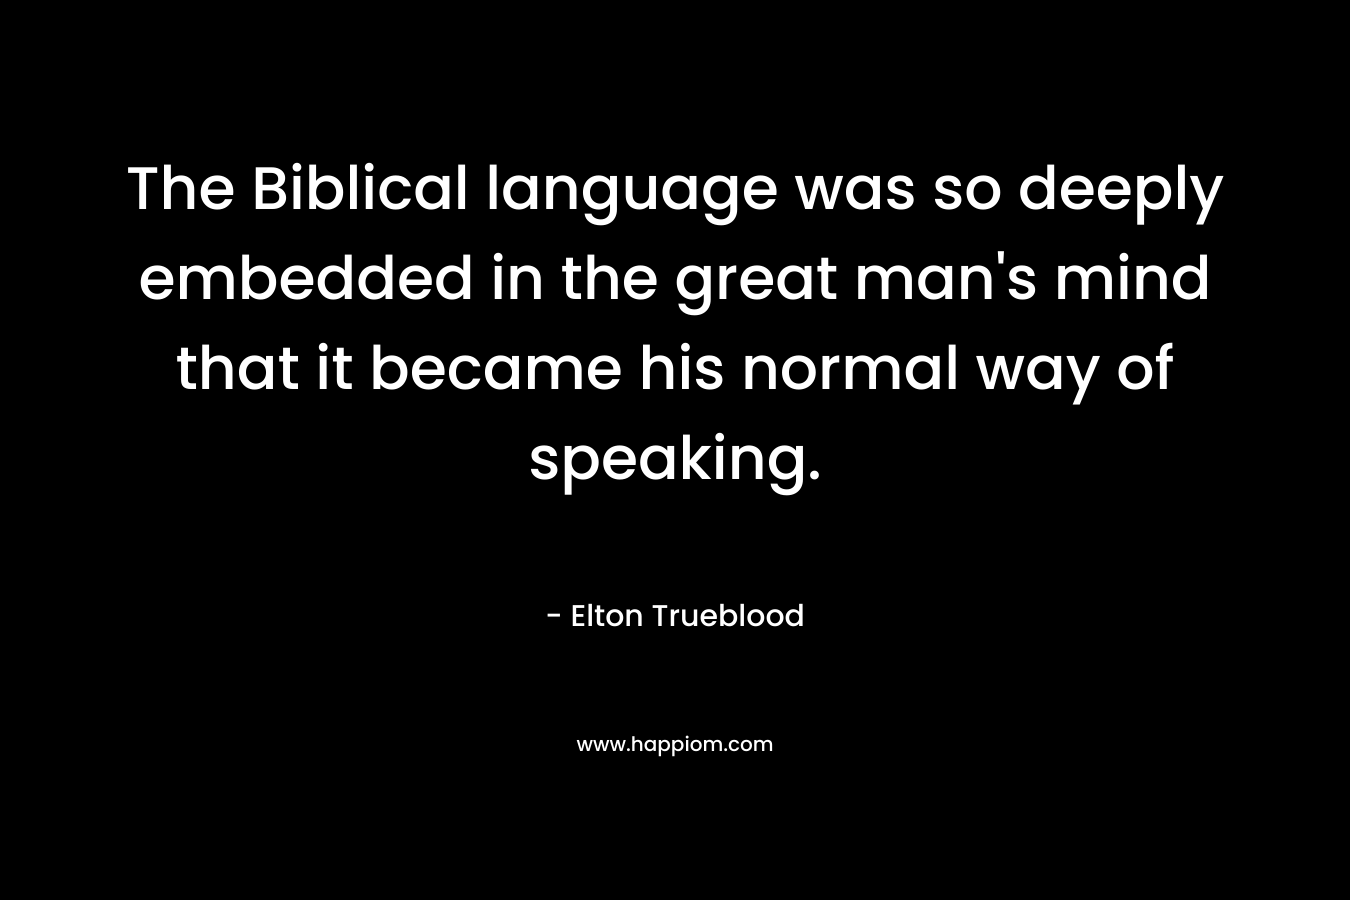 The Biblical language was so deeply embedded in the great man’s mind that it became his normal way of speaking. – Elton Trueblood